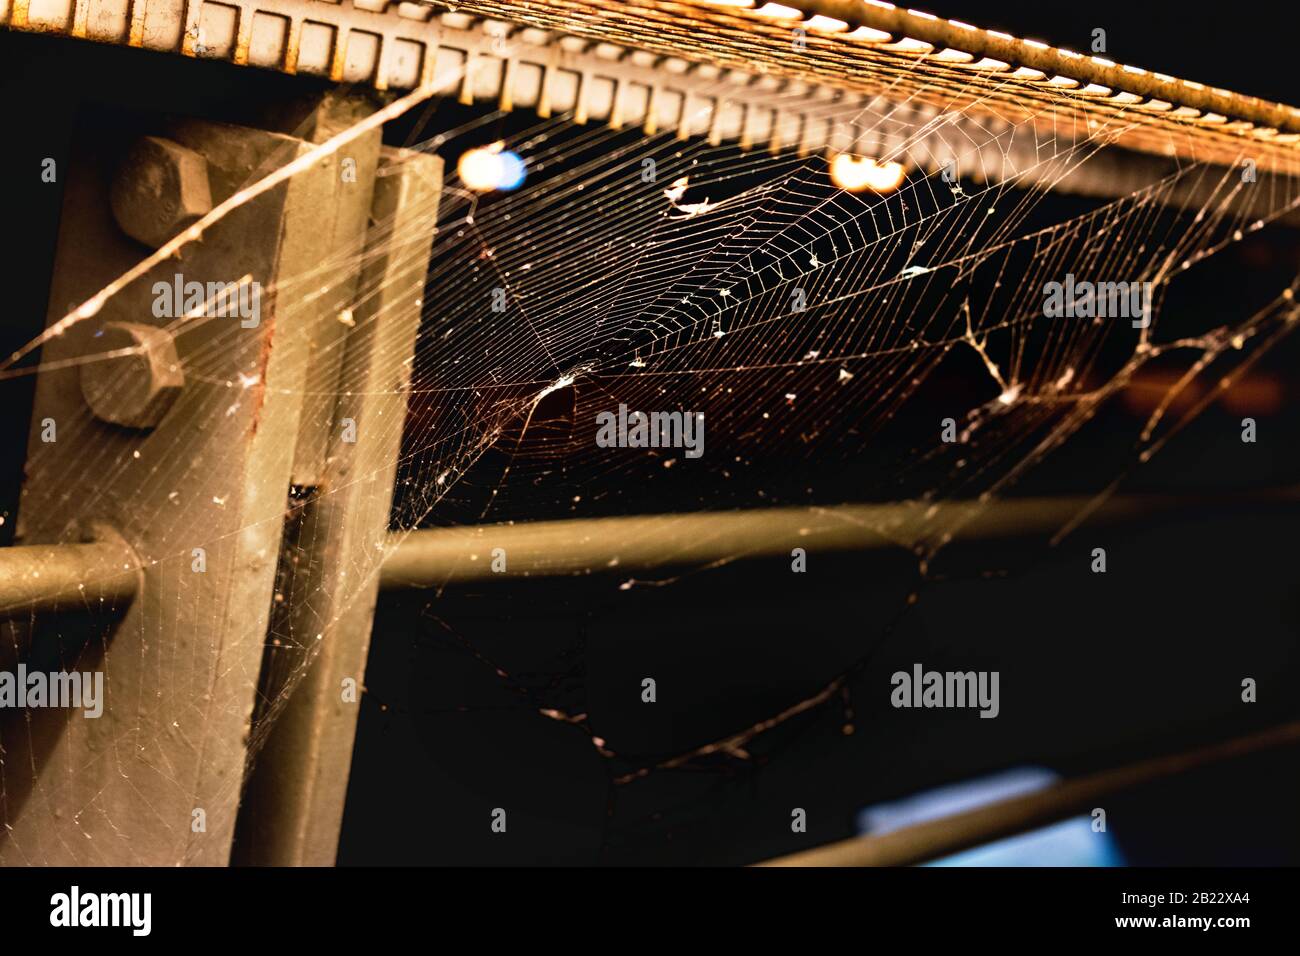 A spider web on metal railings awaits the built-in light. Stock Photo